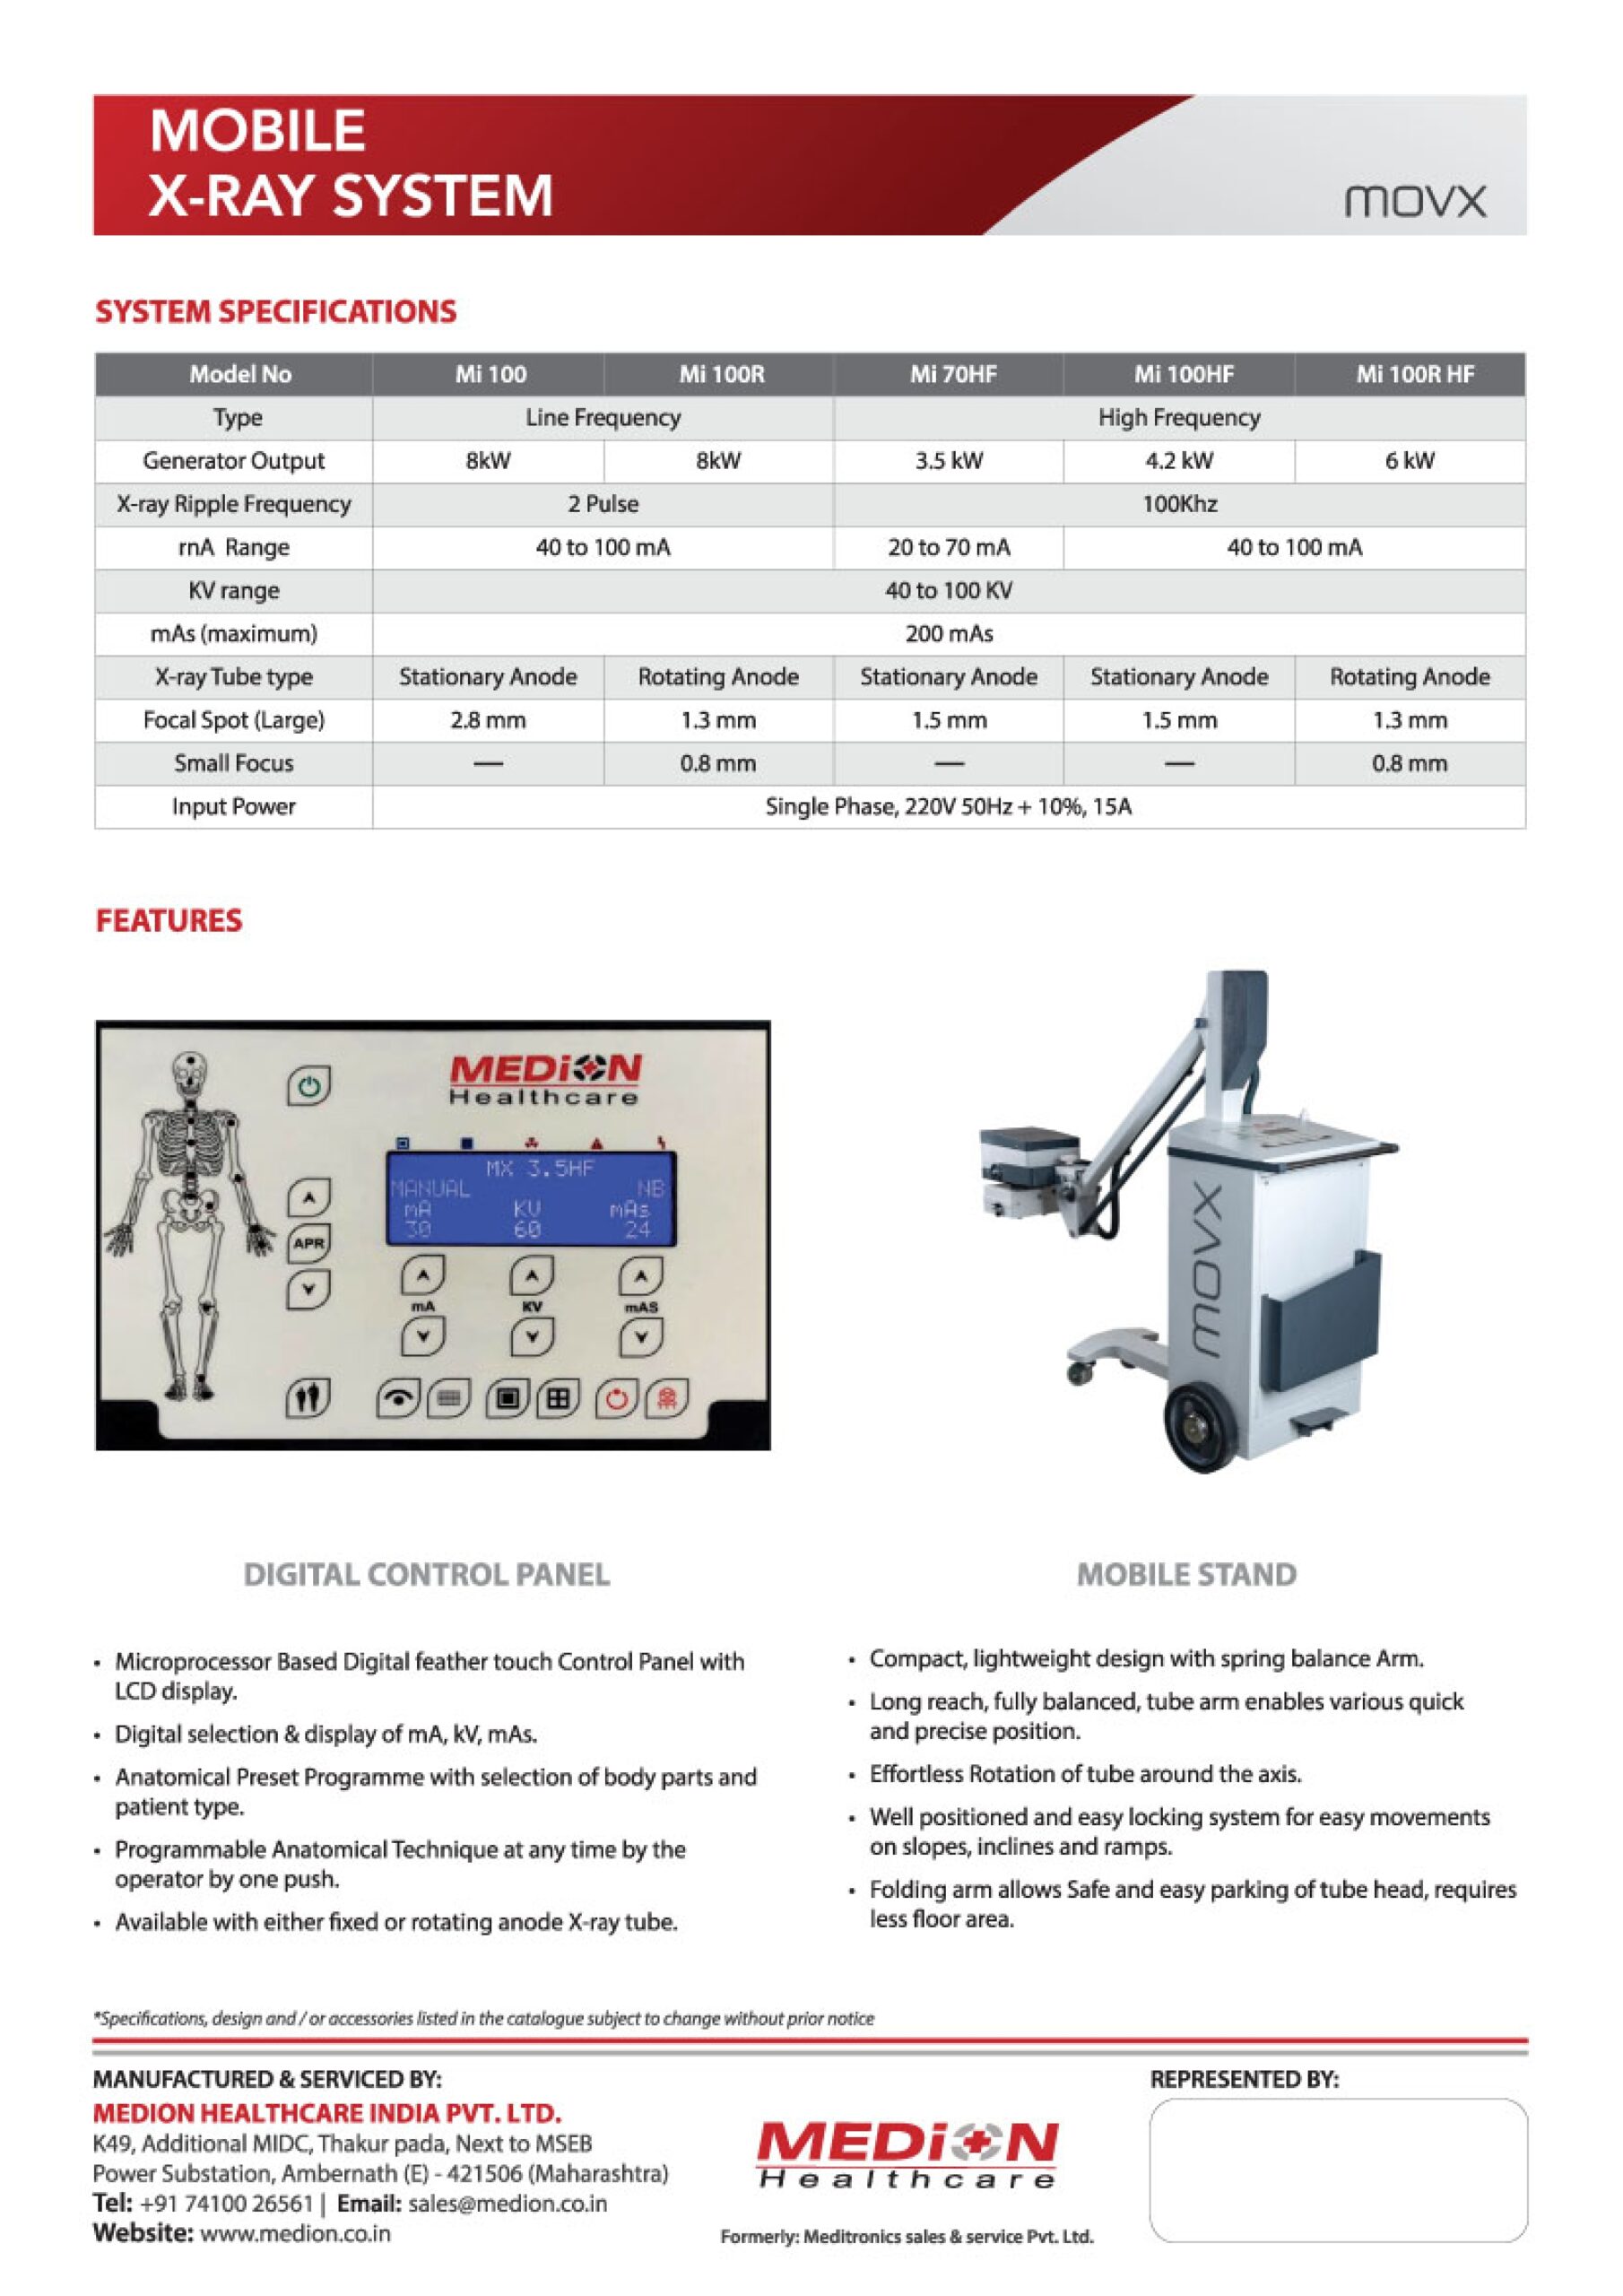 Movx - Medion MovX | Mobile X-ray System